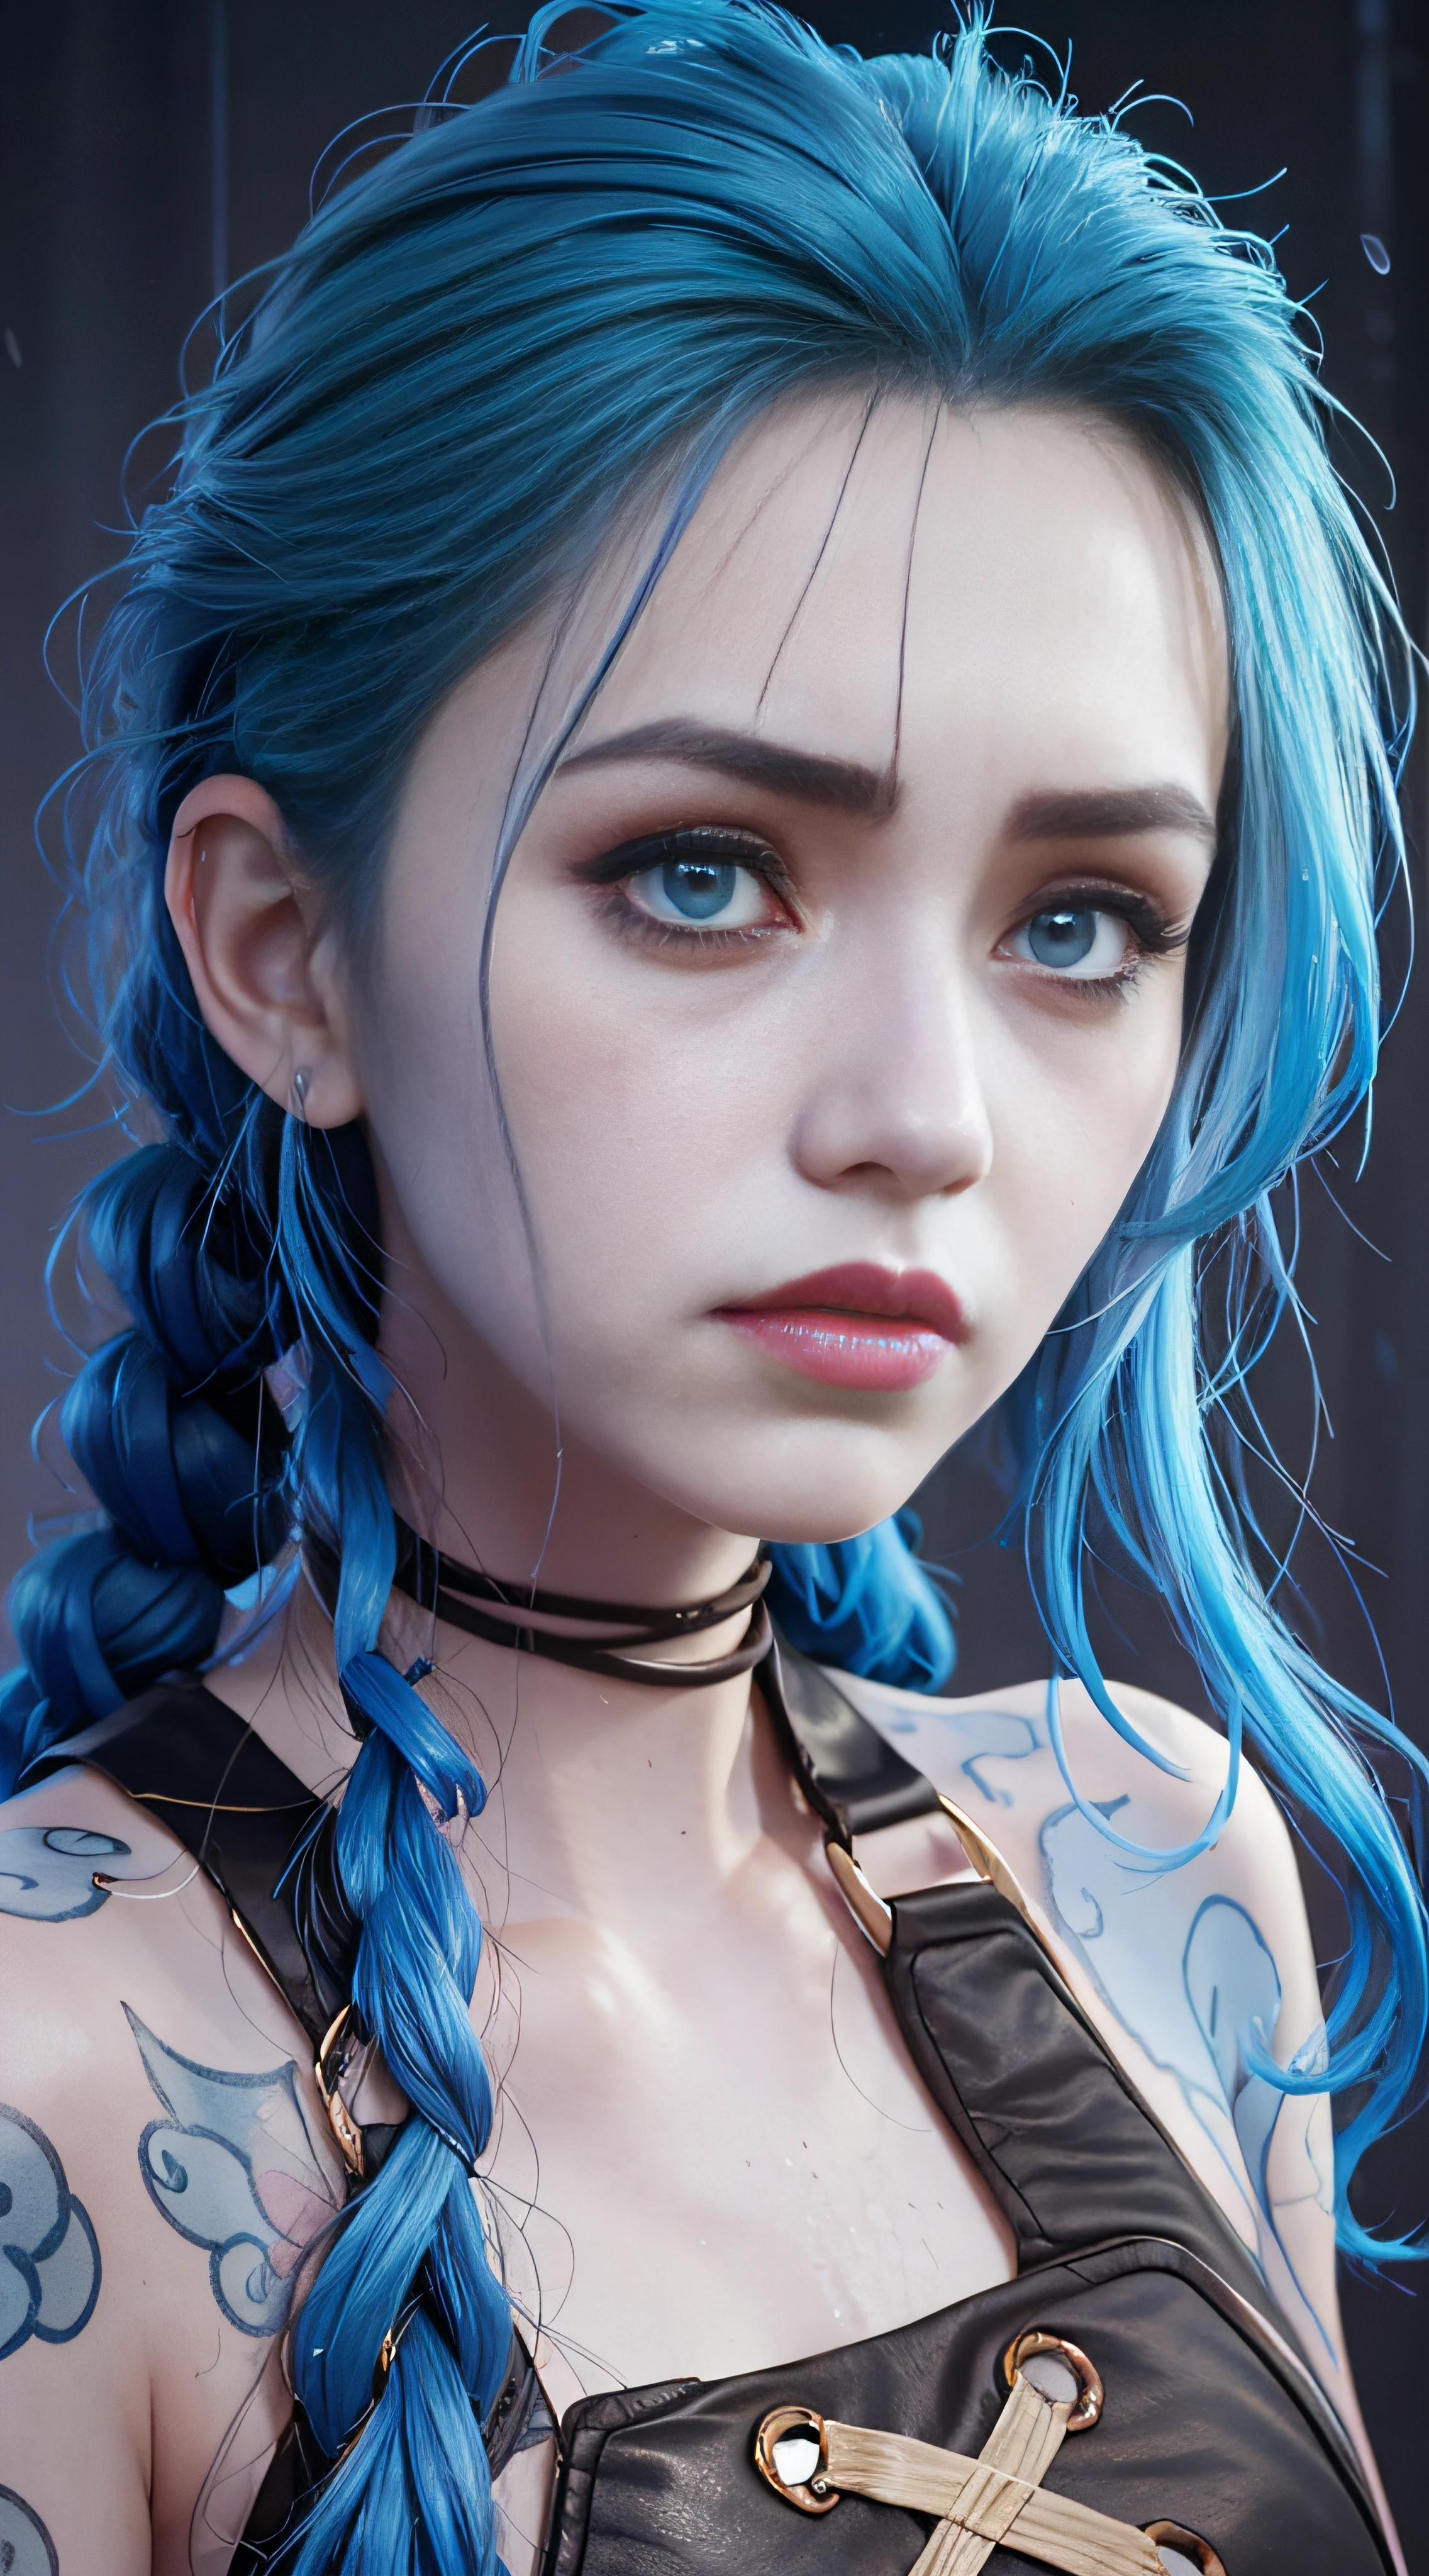 Jinx，Jinx blue hair，（cinematic tones）（The film uses cool colors of blue and gray）（Wet clothes：1.9）,（Get wet all over your body：1.9）,Top image quality, tmasterpiece, Ultra-high resolution, （Fidelity：1.4）, stunningly beautiful woman, （Deeply condolences）, , dim murky lights, shadowy, Desperate, Pity, Pathetic, cinematic, Tears, tear drop, , Real rain, wetting hair,. Surprising crying, Clear white skin,  There are scratches everywhere, Dirty face,  White skin,  Smooth skin, Surprisingly realistic pictures, 8K high quality medium dark illumination, High detail, Detail Eye, Detail Make,